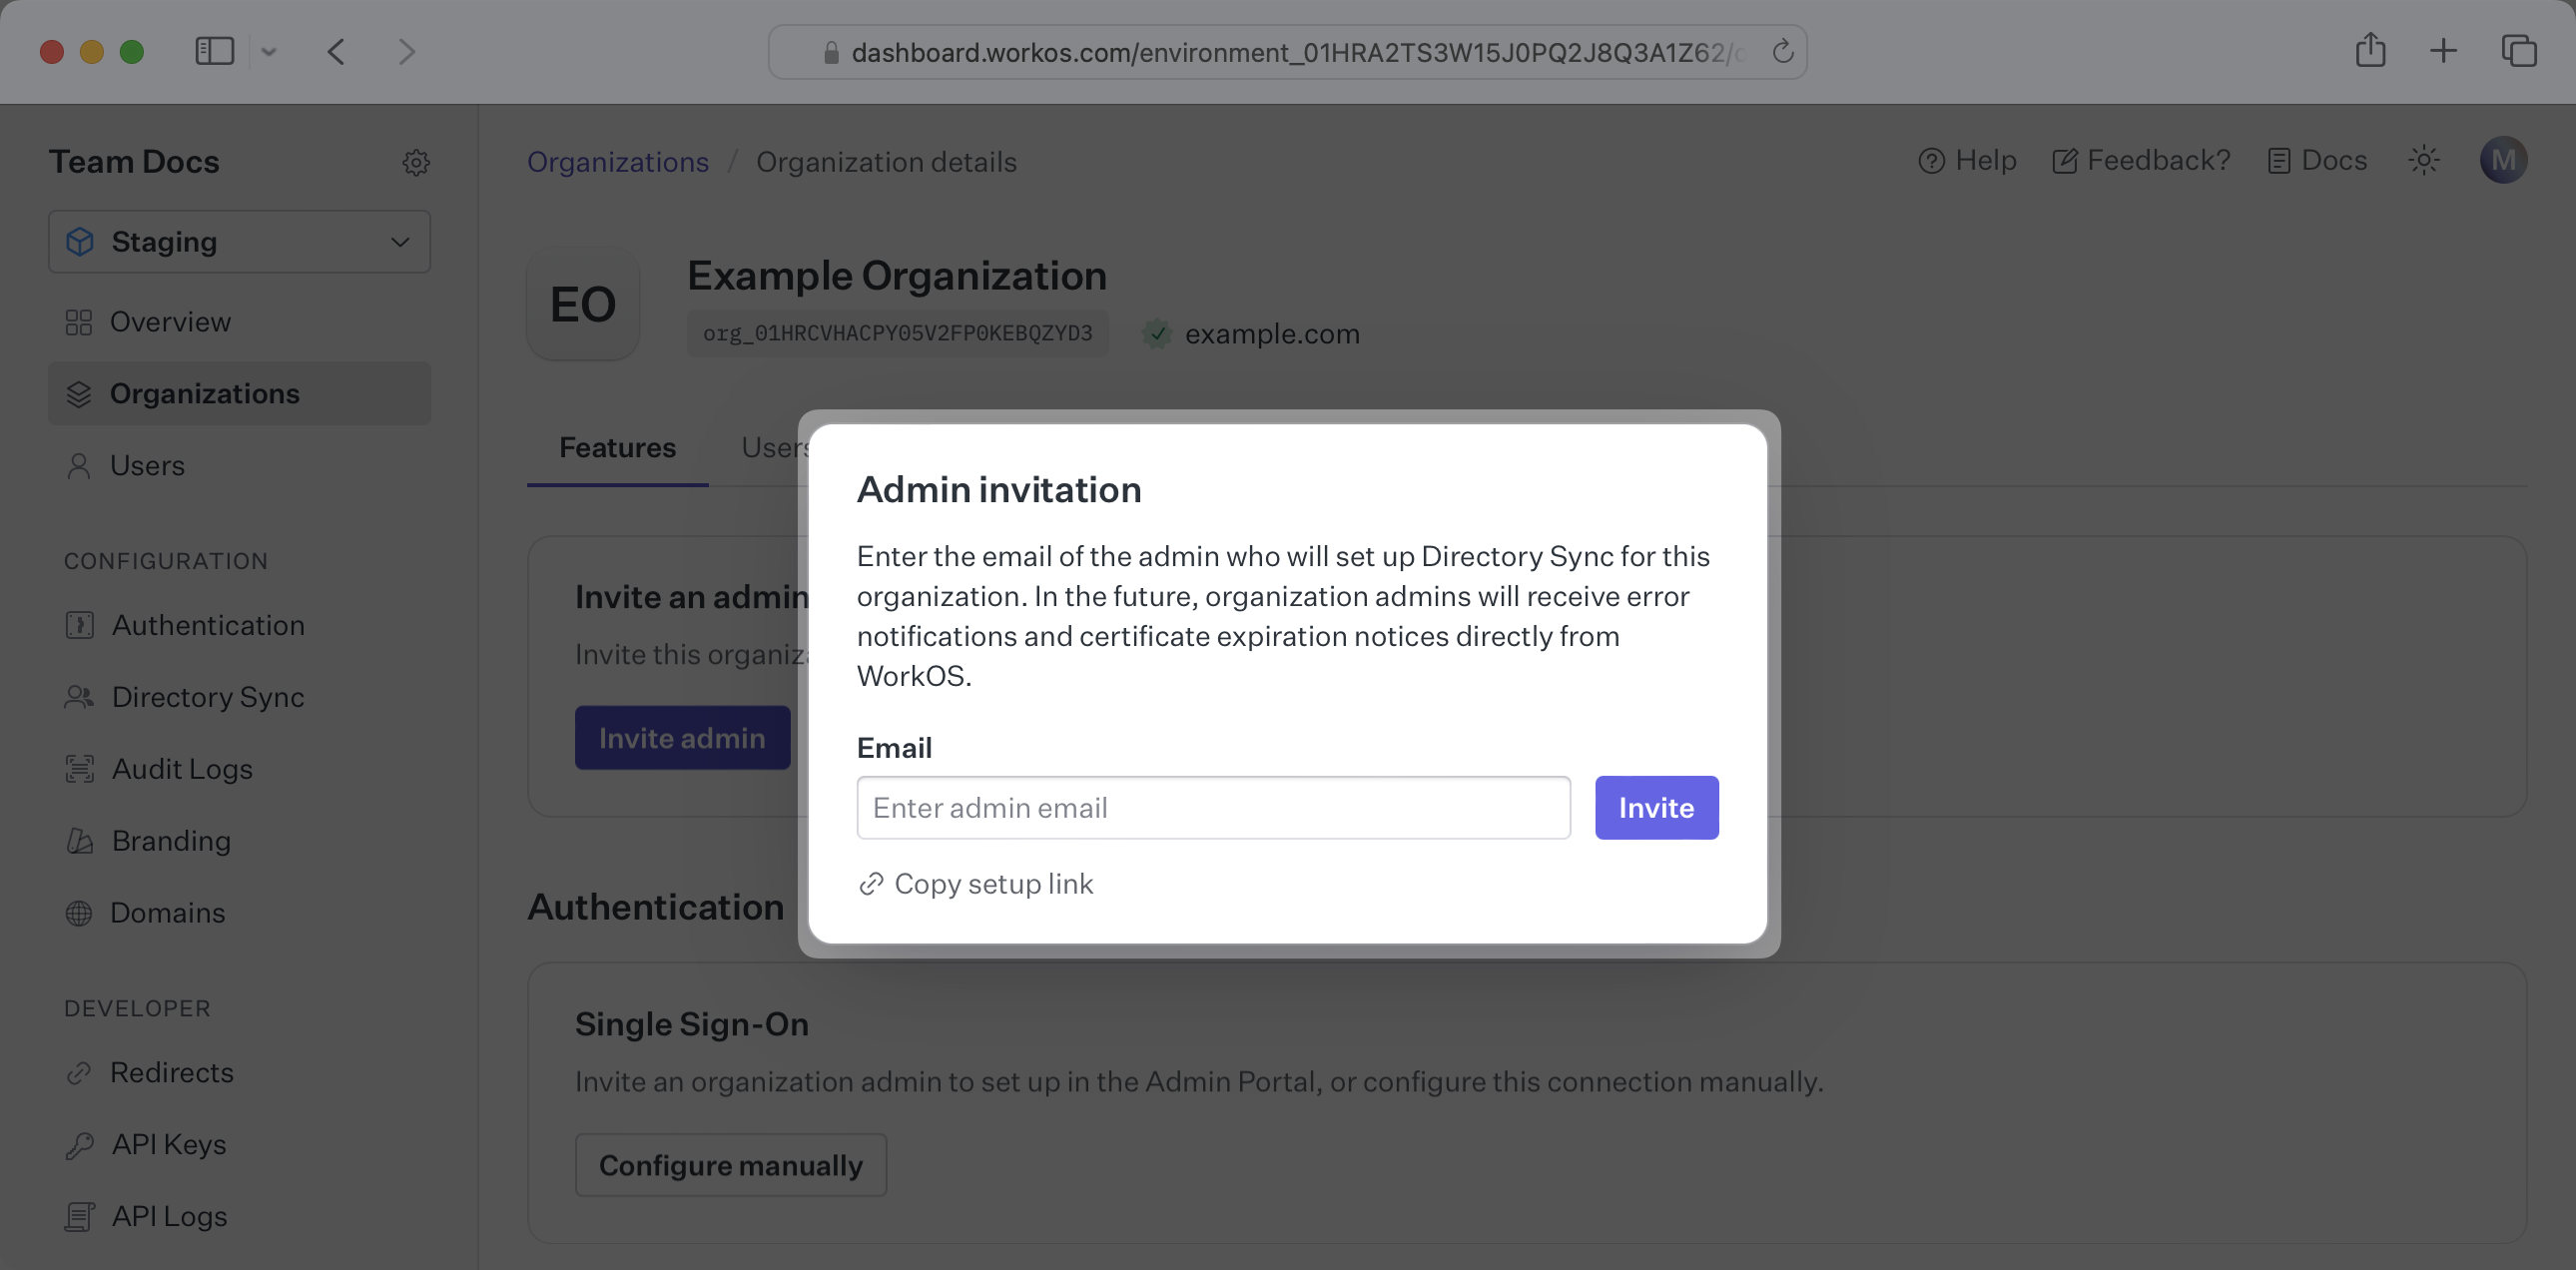 Enter the organization admin's email address, or copy the setup link.